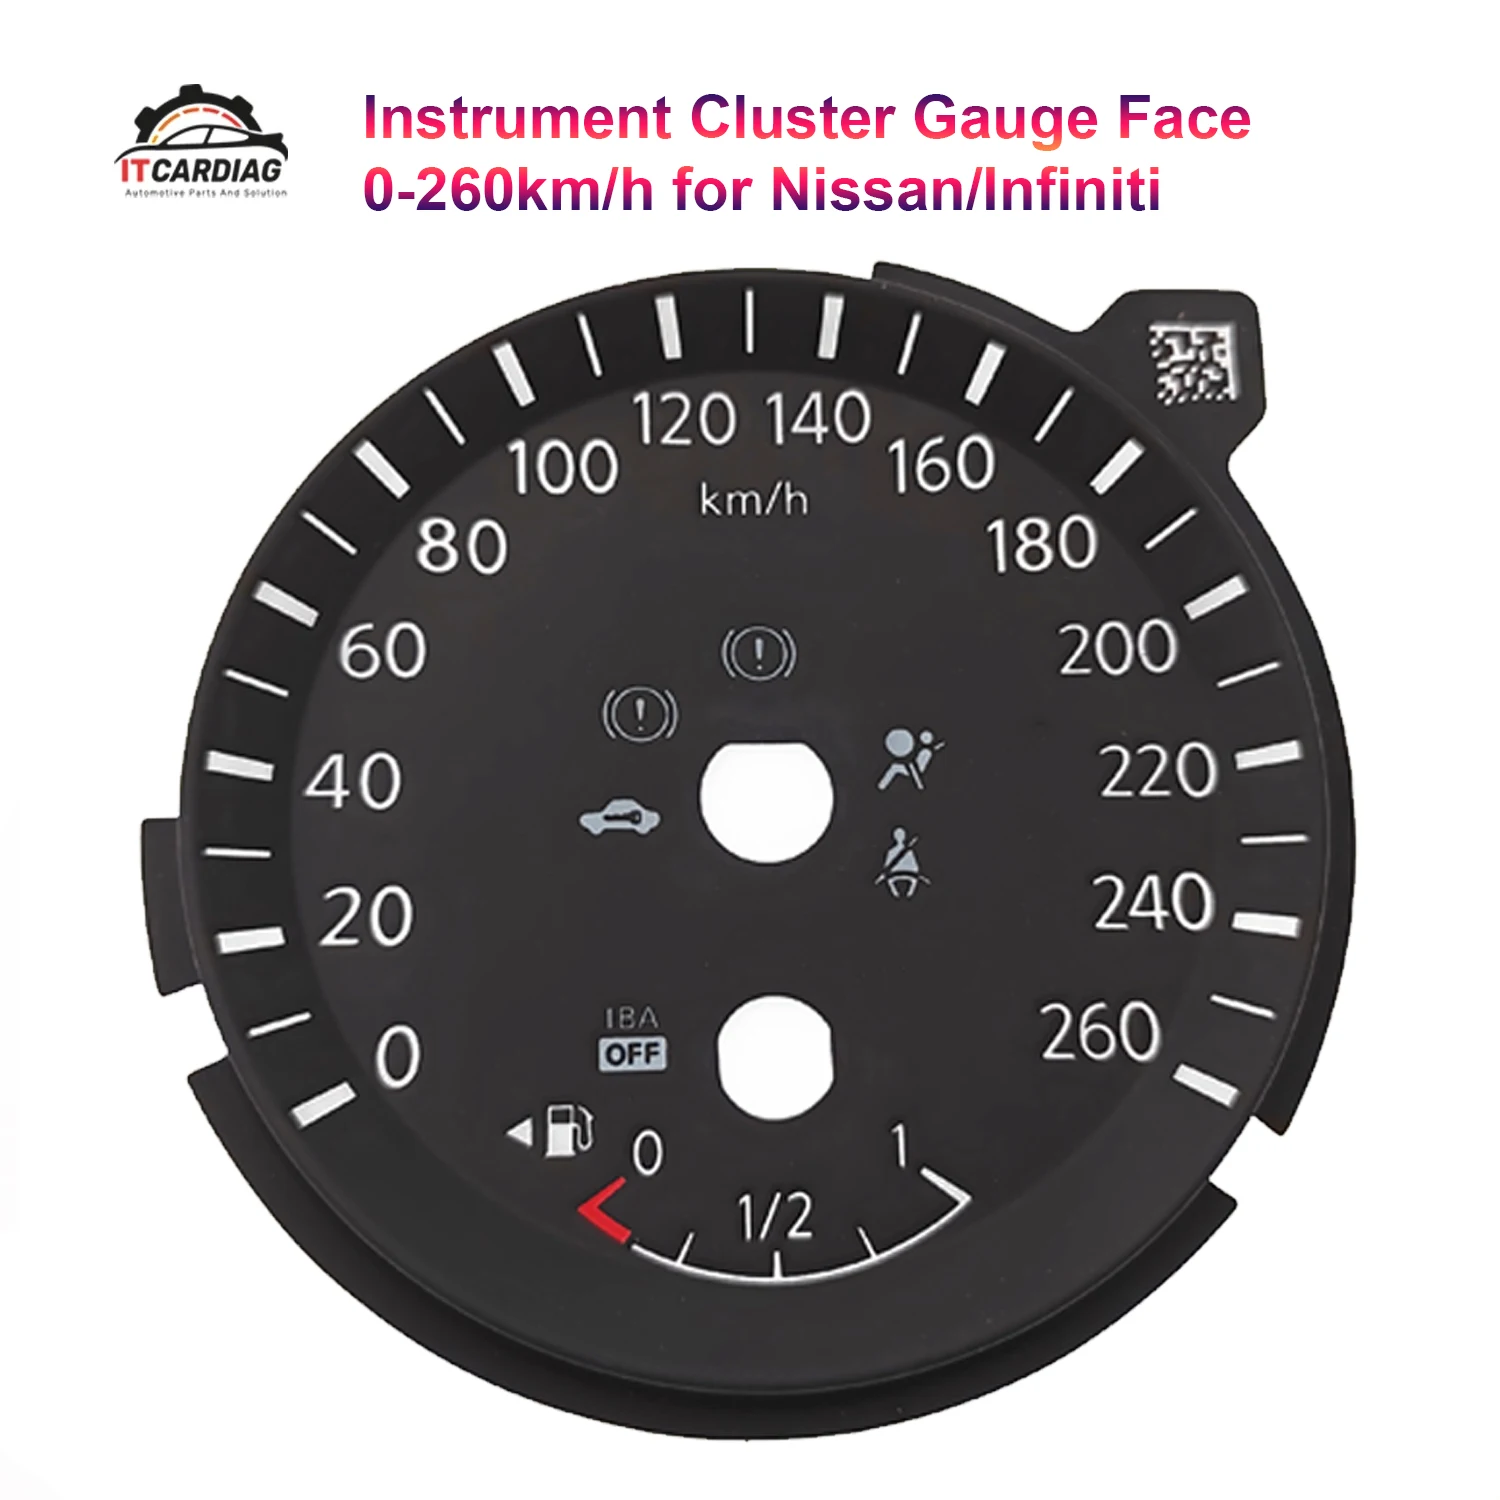 

Instrument Cluster Gauge Face for Nissan/Infiniti Auto 0-260km/h VDO Speedometer Dashboard Faceplate Retrofit A2C31244901 AD05